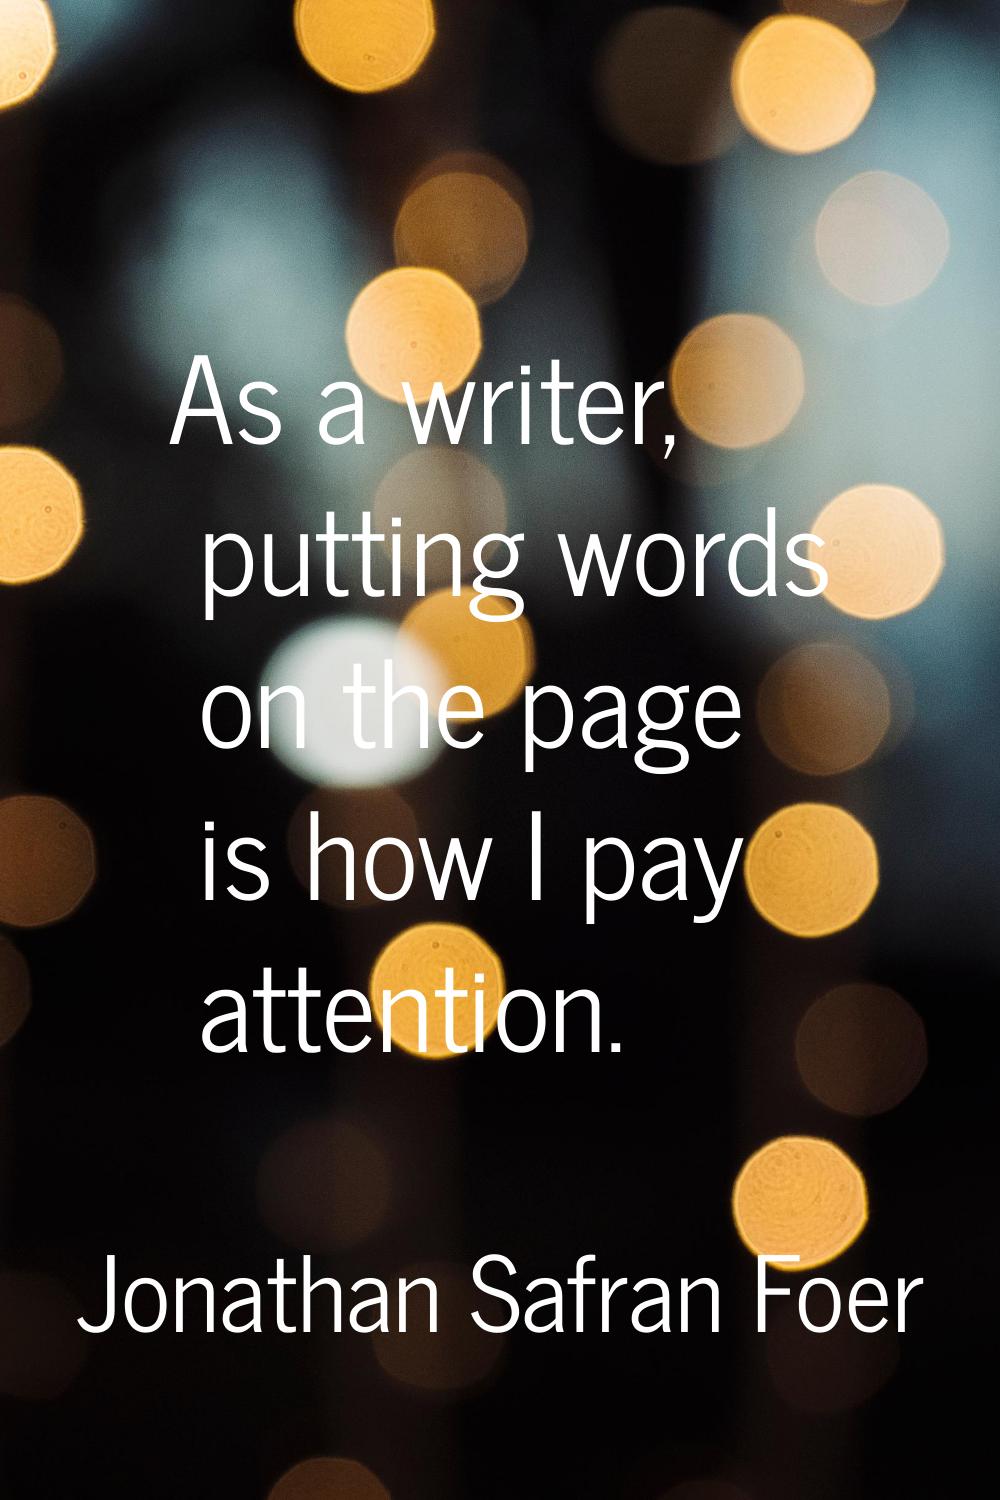 As a writer, putting words on the page is how I pay attention.